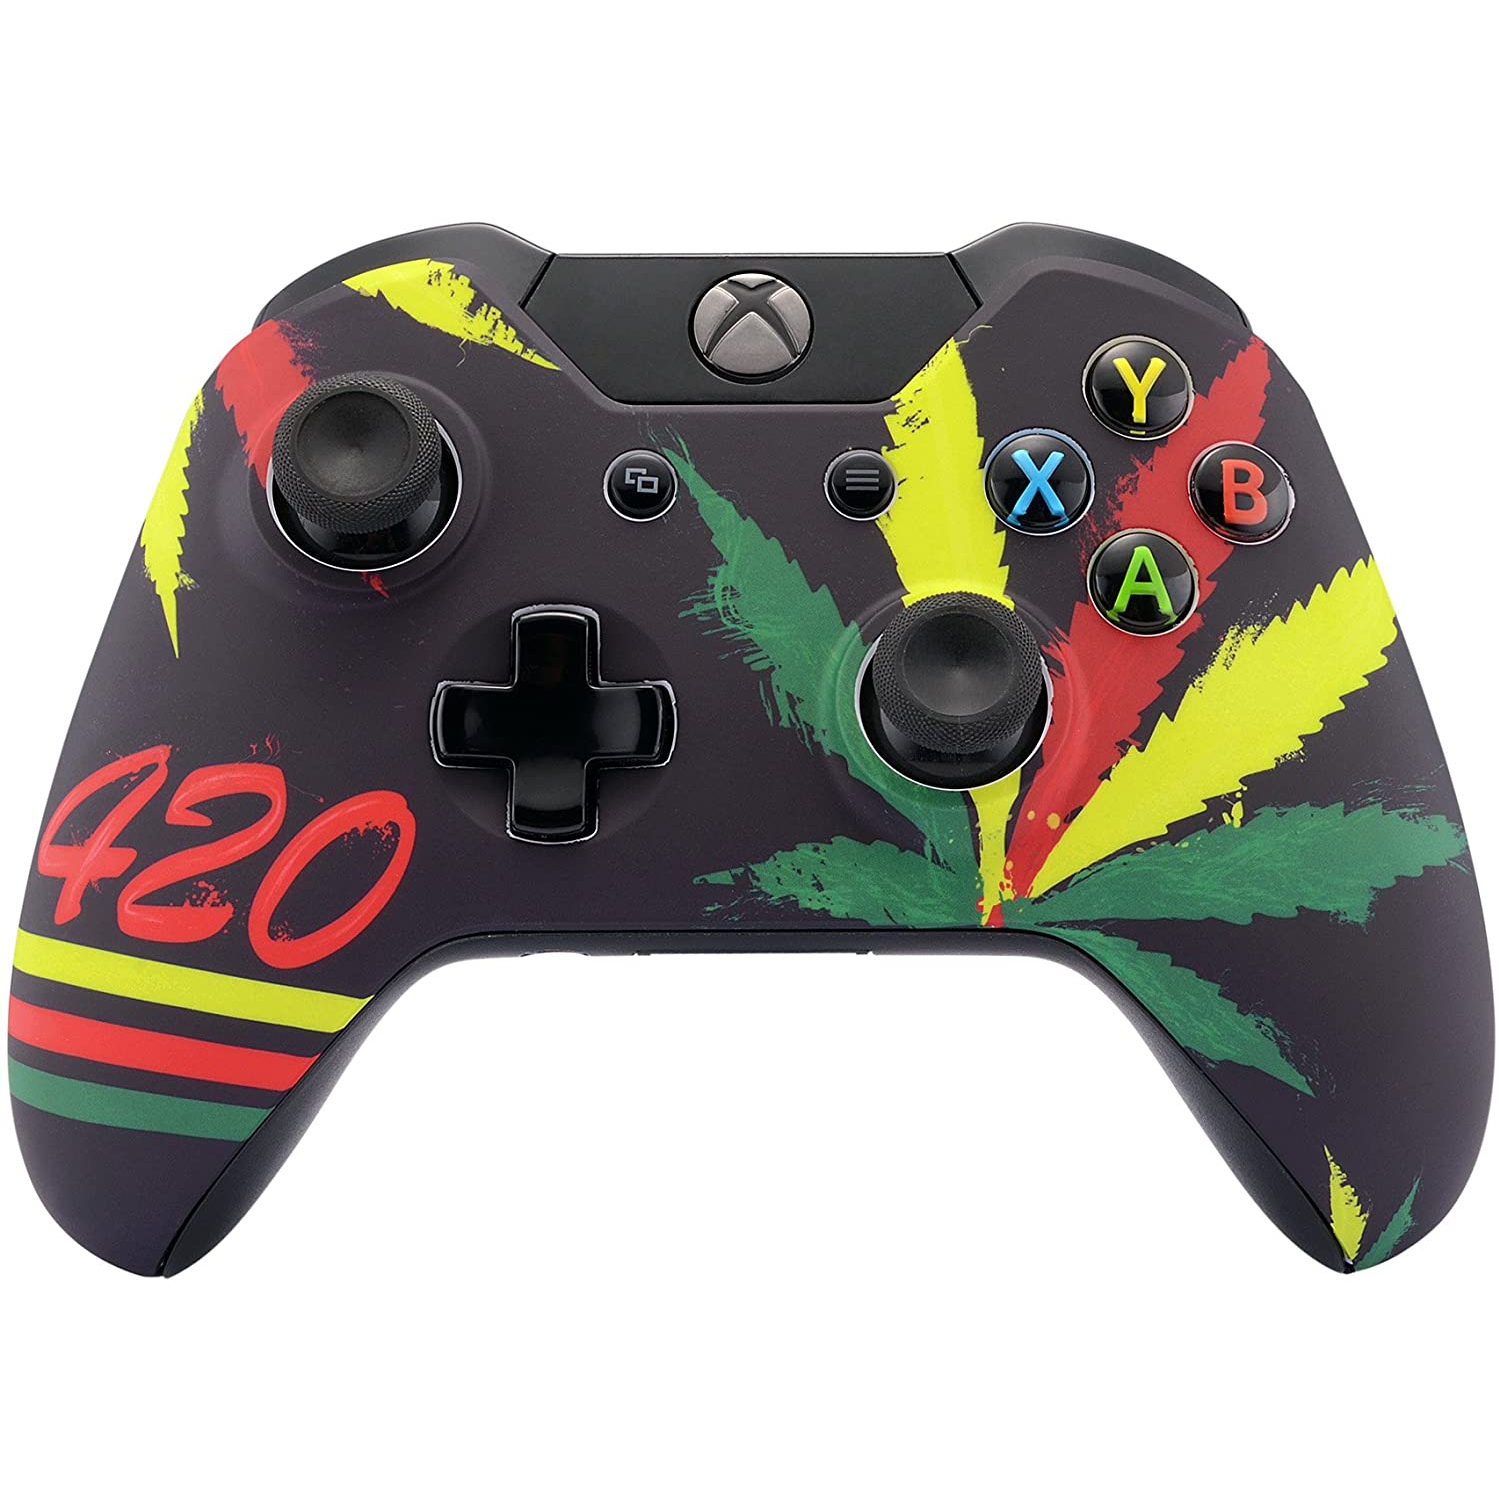 Weeds Leaves Soft Touch Grip Front Housing Shell Faceplate for Standard Xbox One Controller (Fits Both